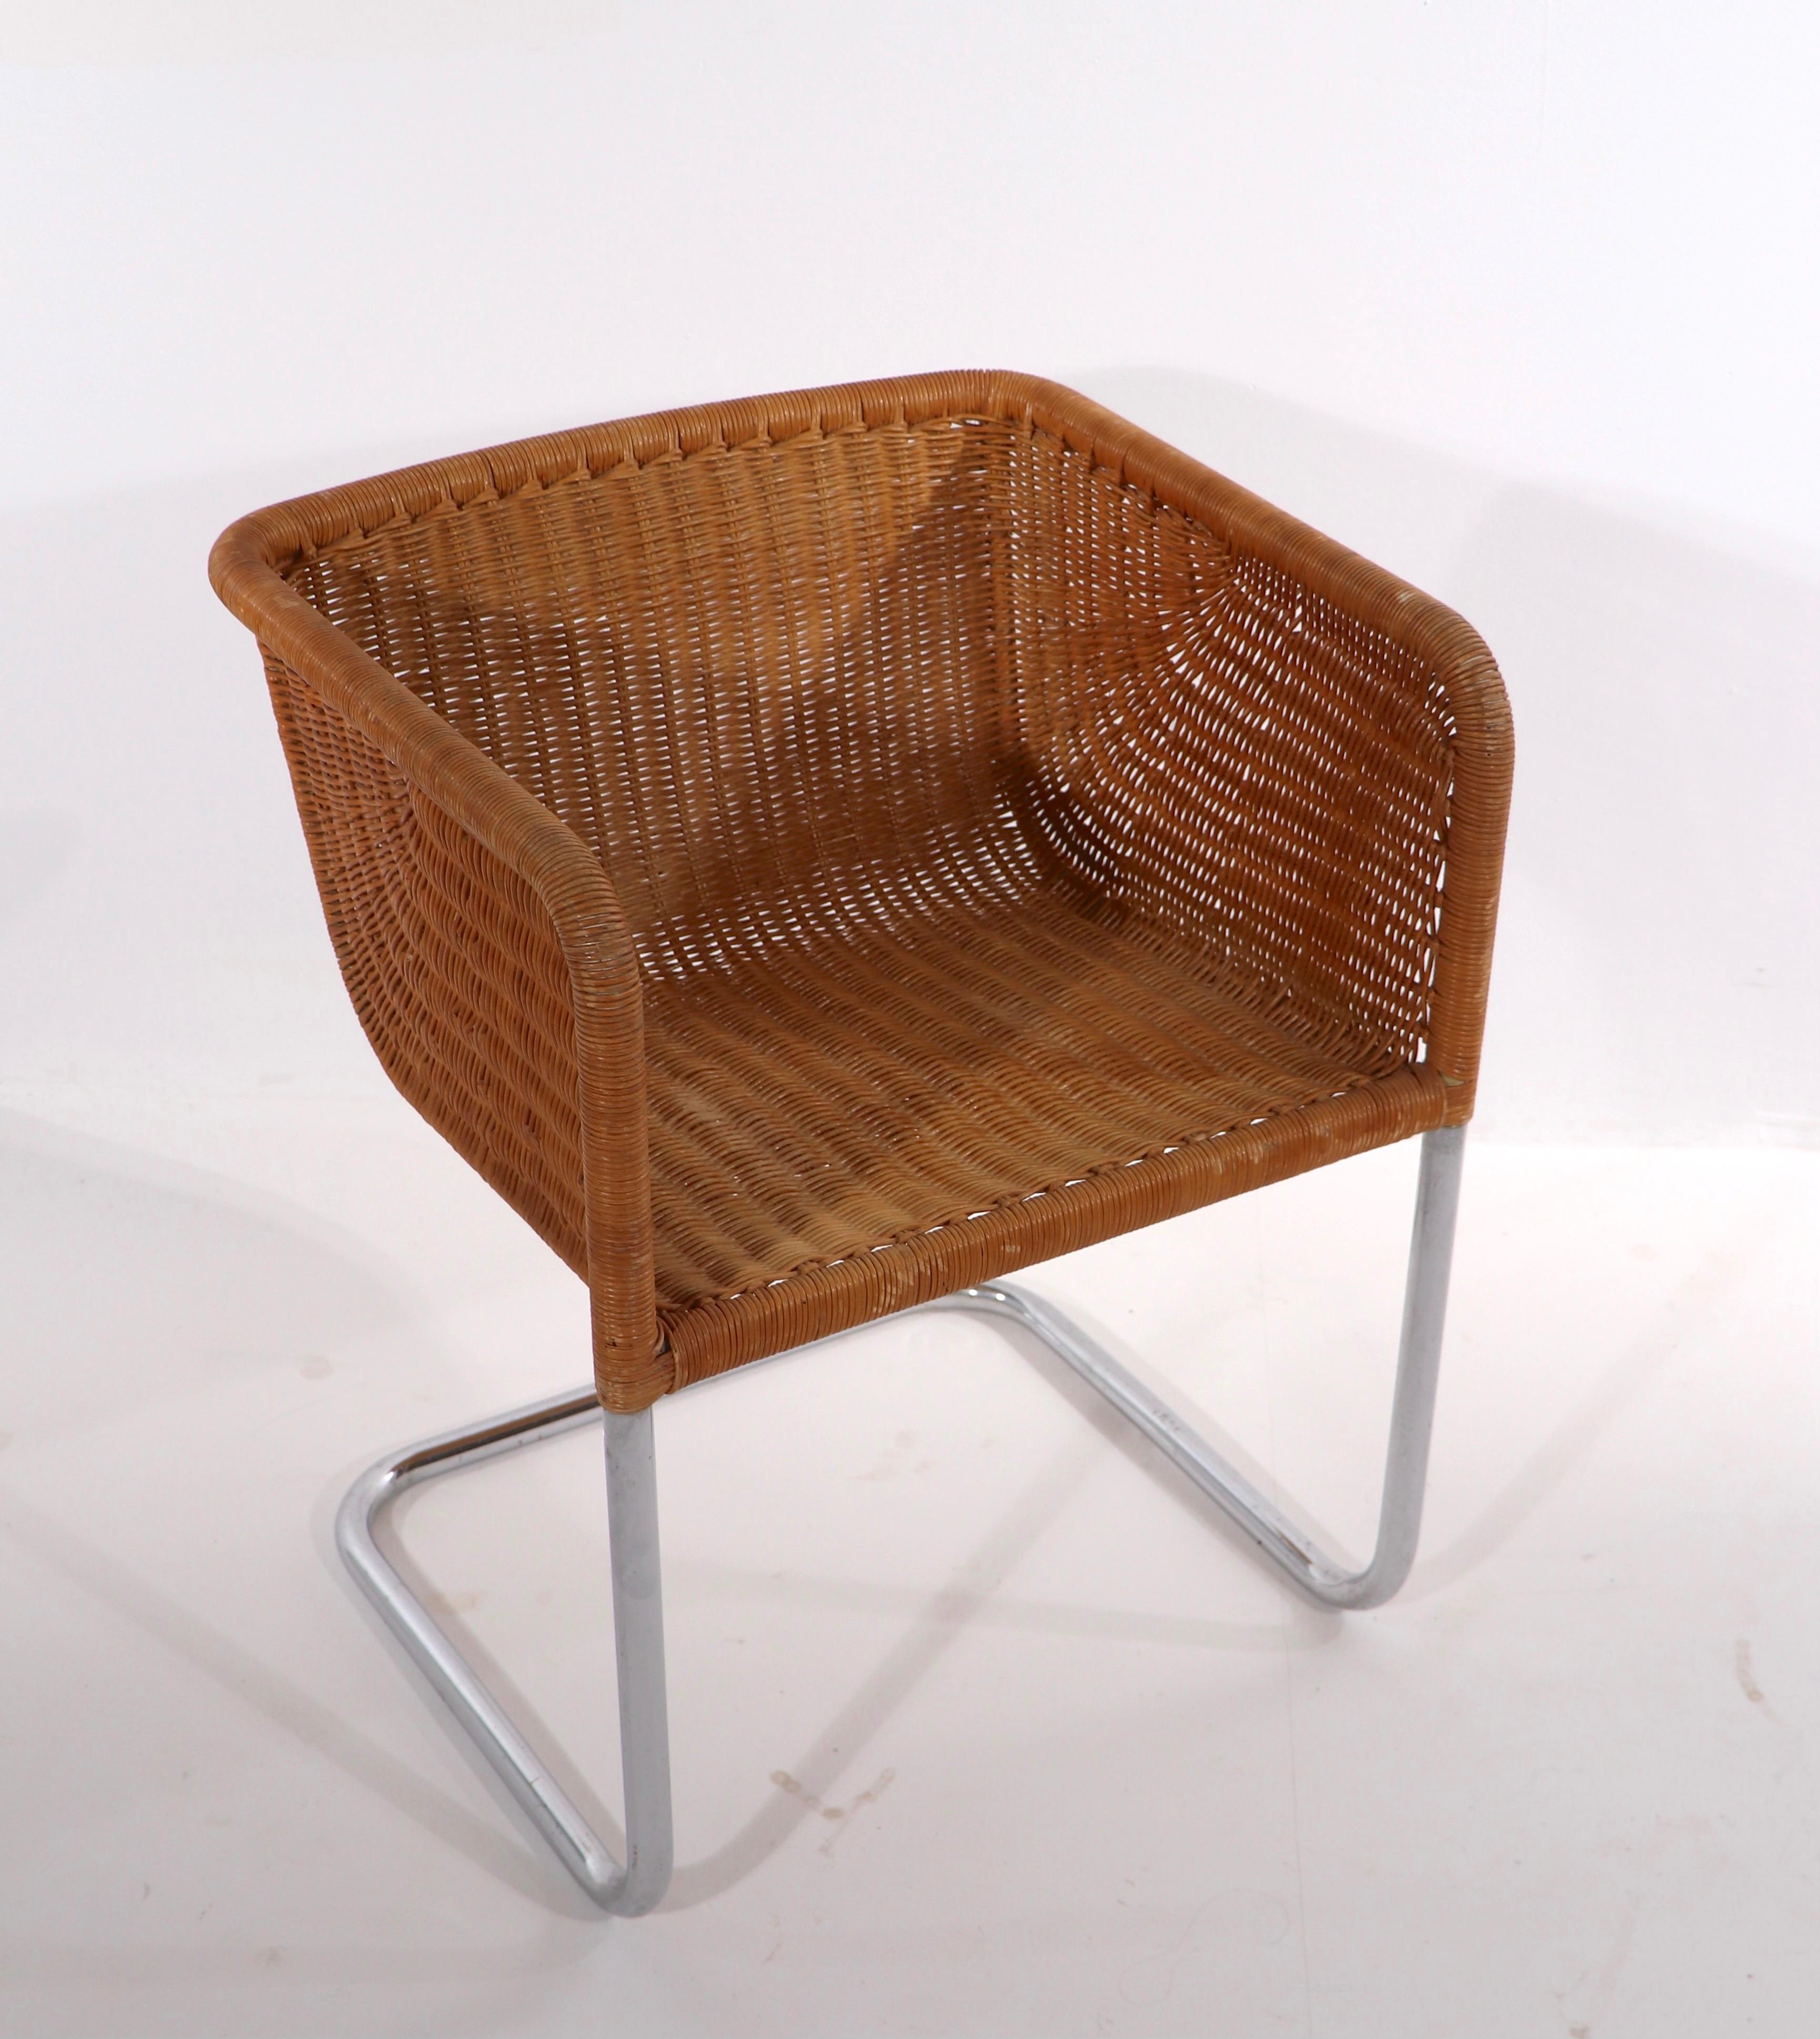 Iconic wicker and chrome D43 cantilevered chair by Fabricus and Kastholm for Harvey Probber, circa 1960's. This example is in very fine, original condition, showing only inconsequential cosmetic wear, normal and consistent with age. Perfect for use